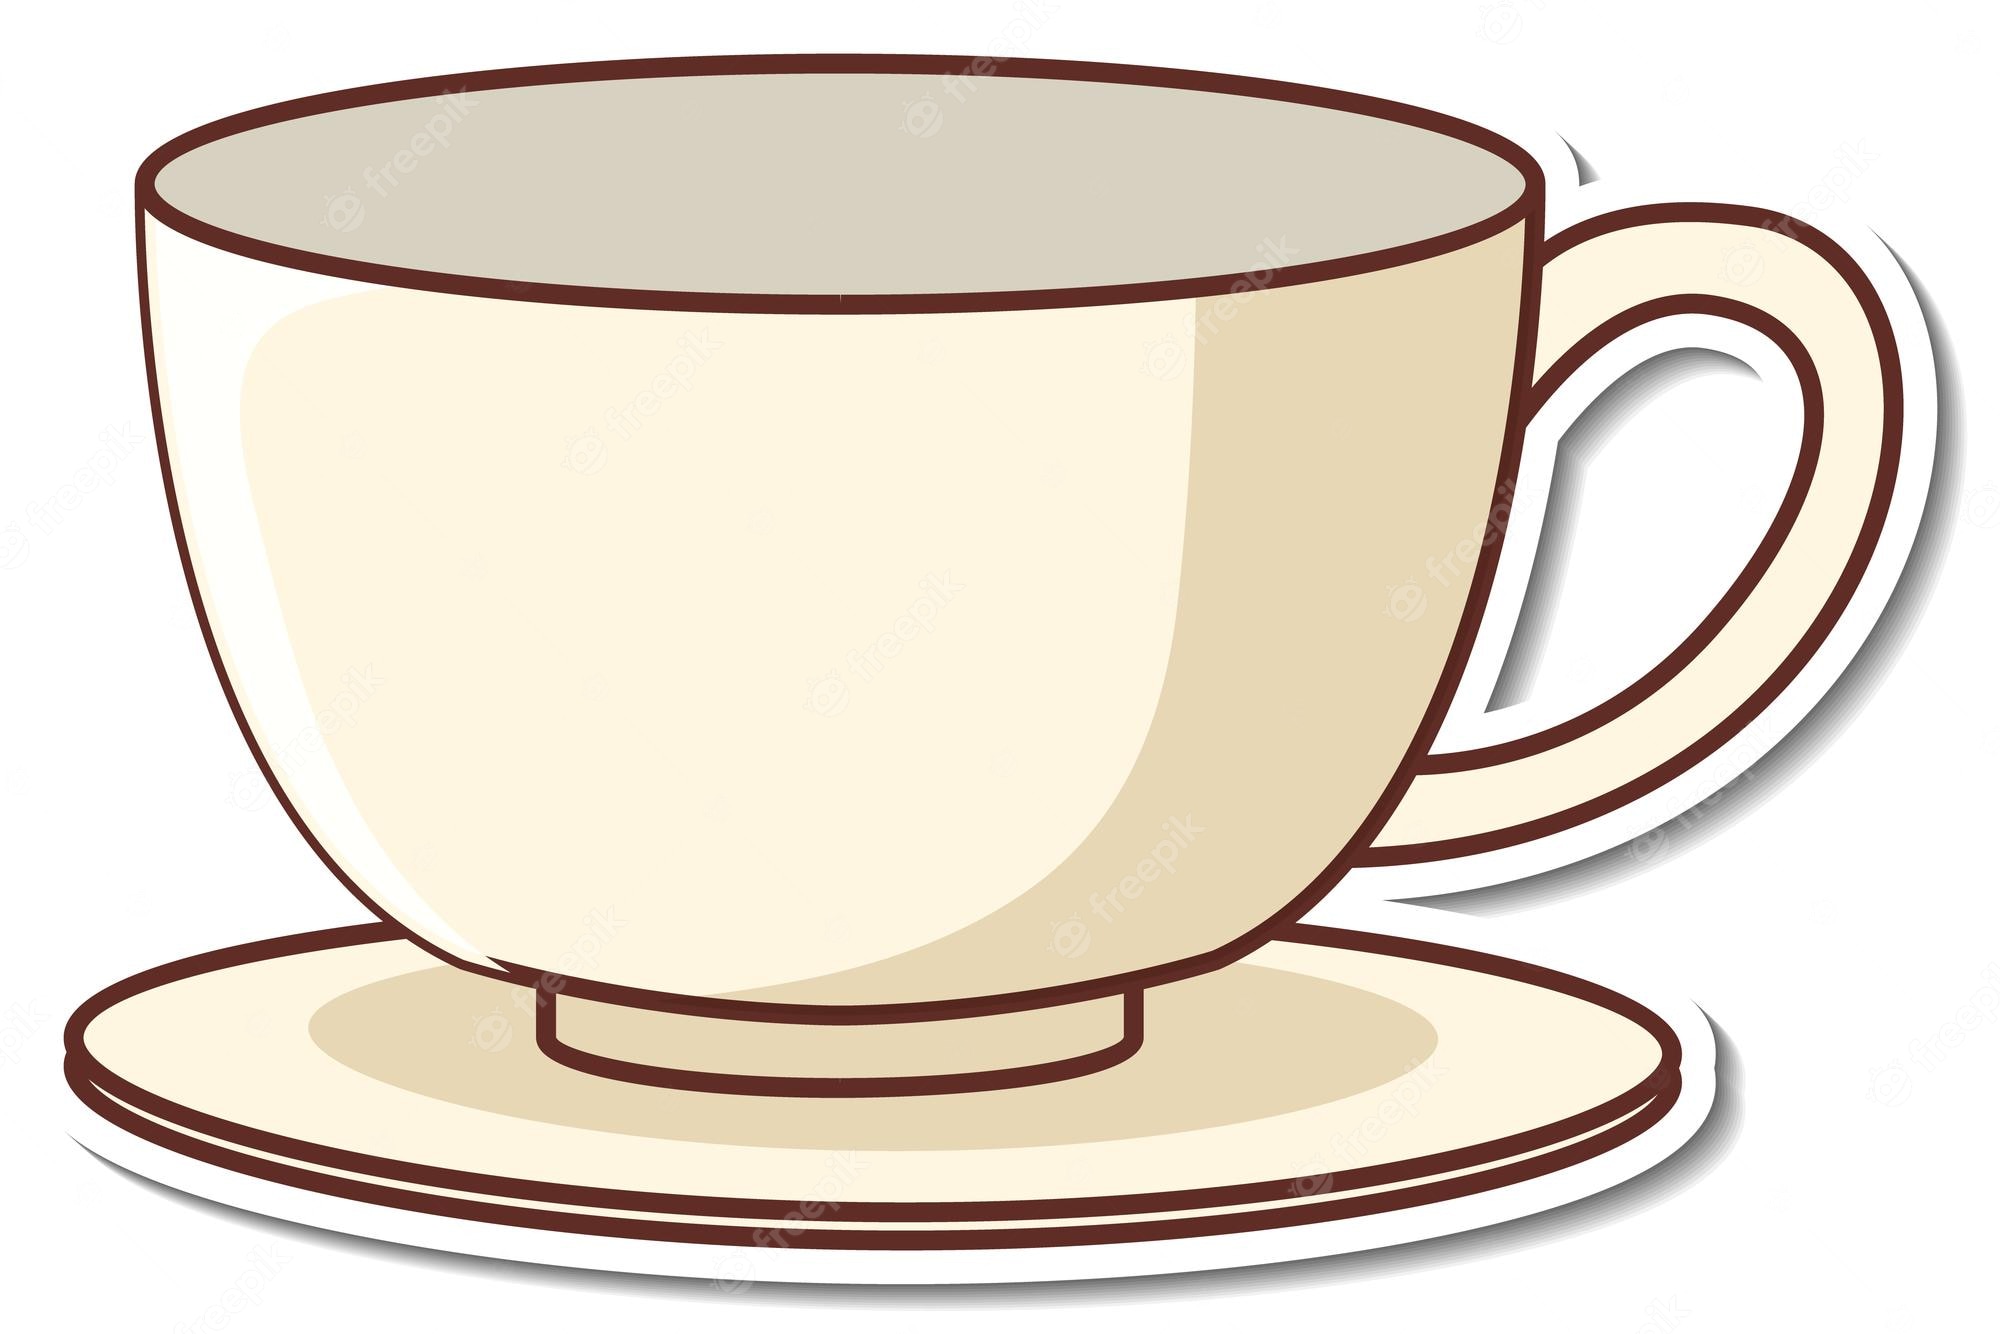 https://clipart-library.com/2023/sticker-design-with-empty-tea-cup-isolated_1308-67318.jpg